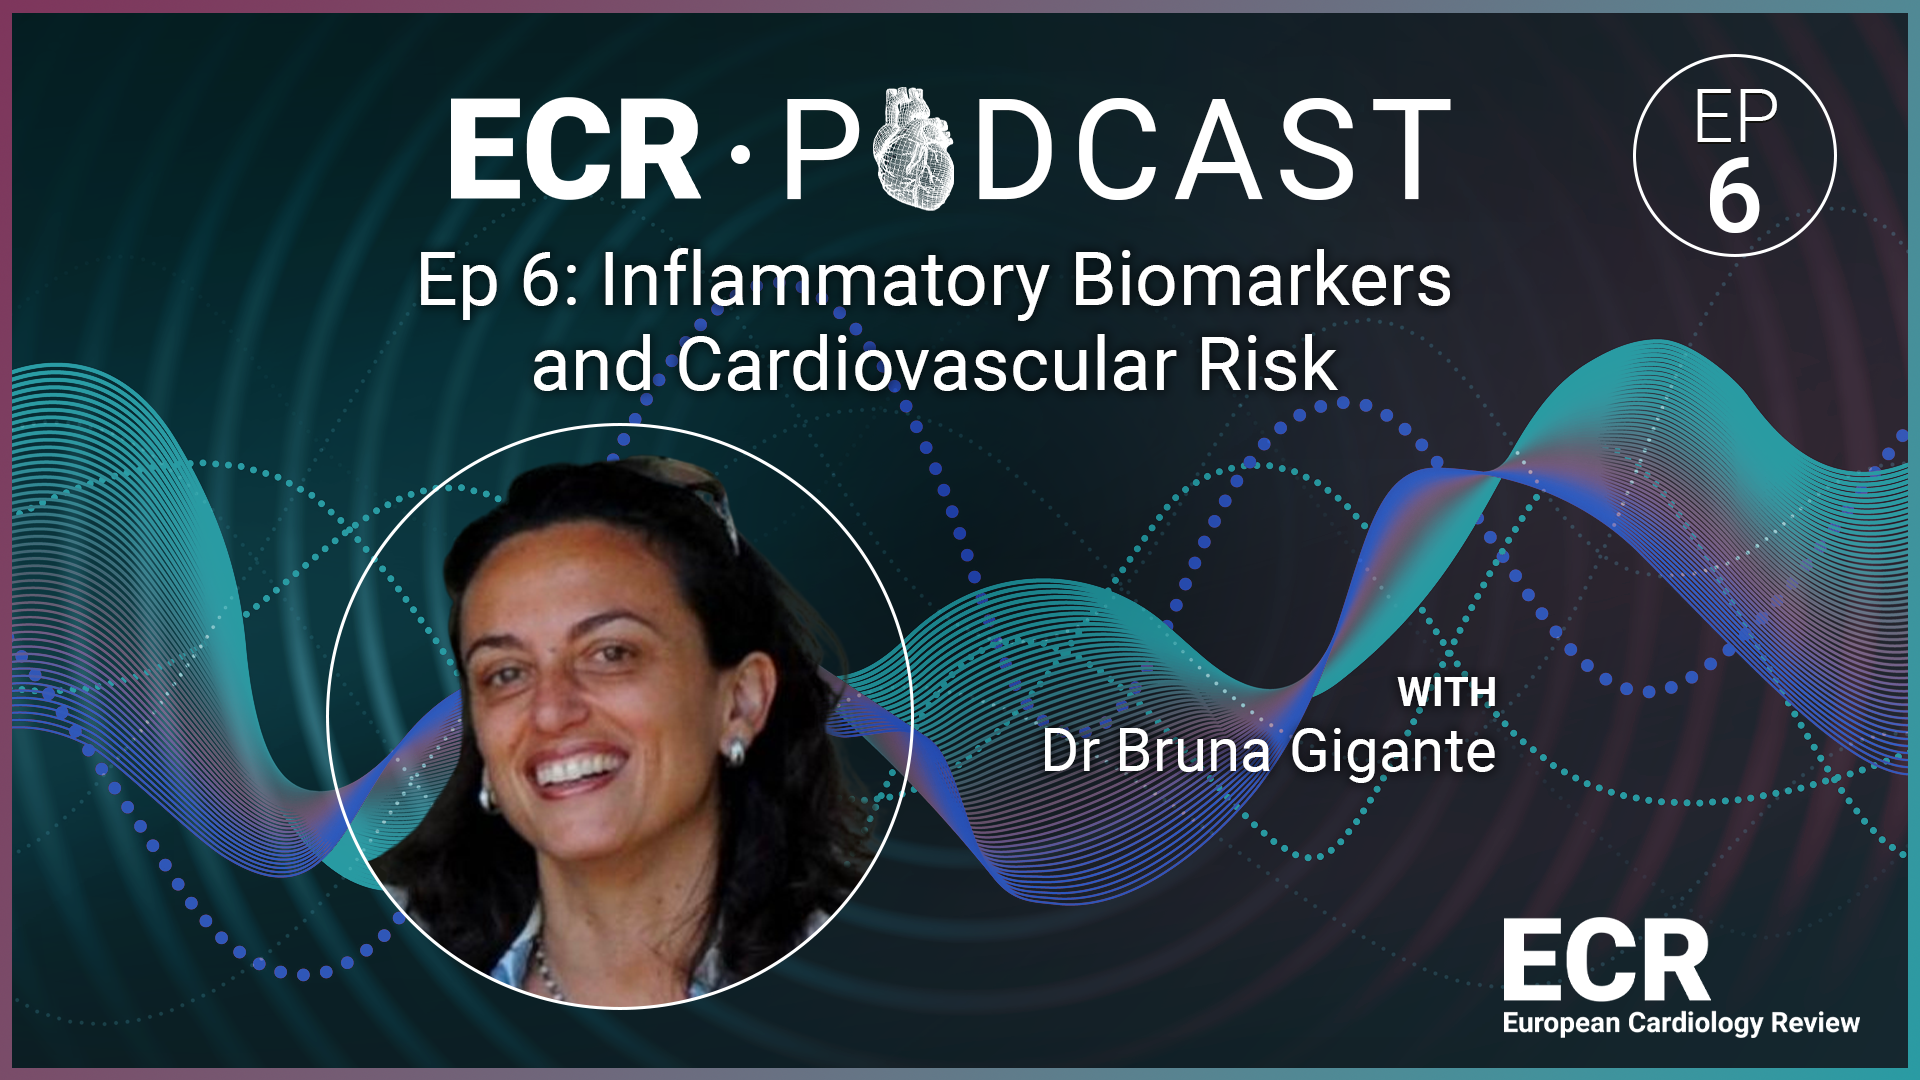 ECR Podcast - Ep 6: Inflammatory Biomarkers and Cardiovascular Risk